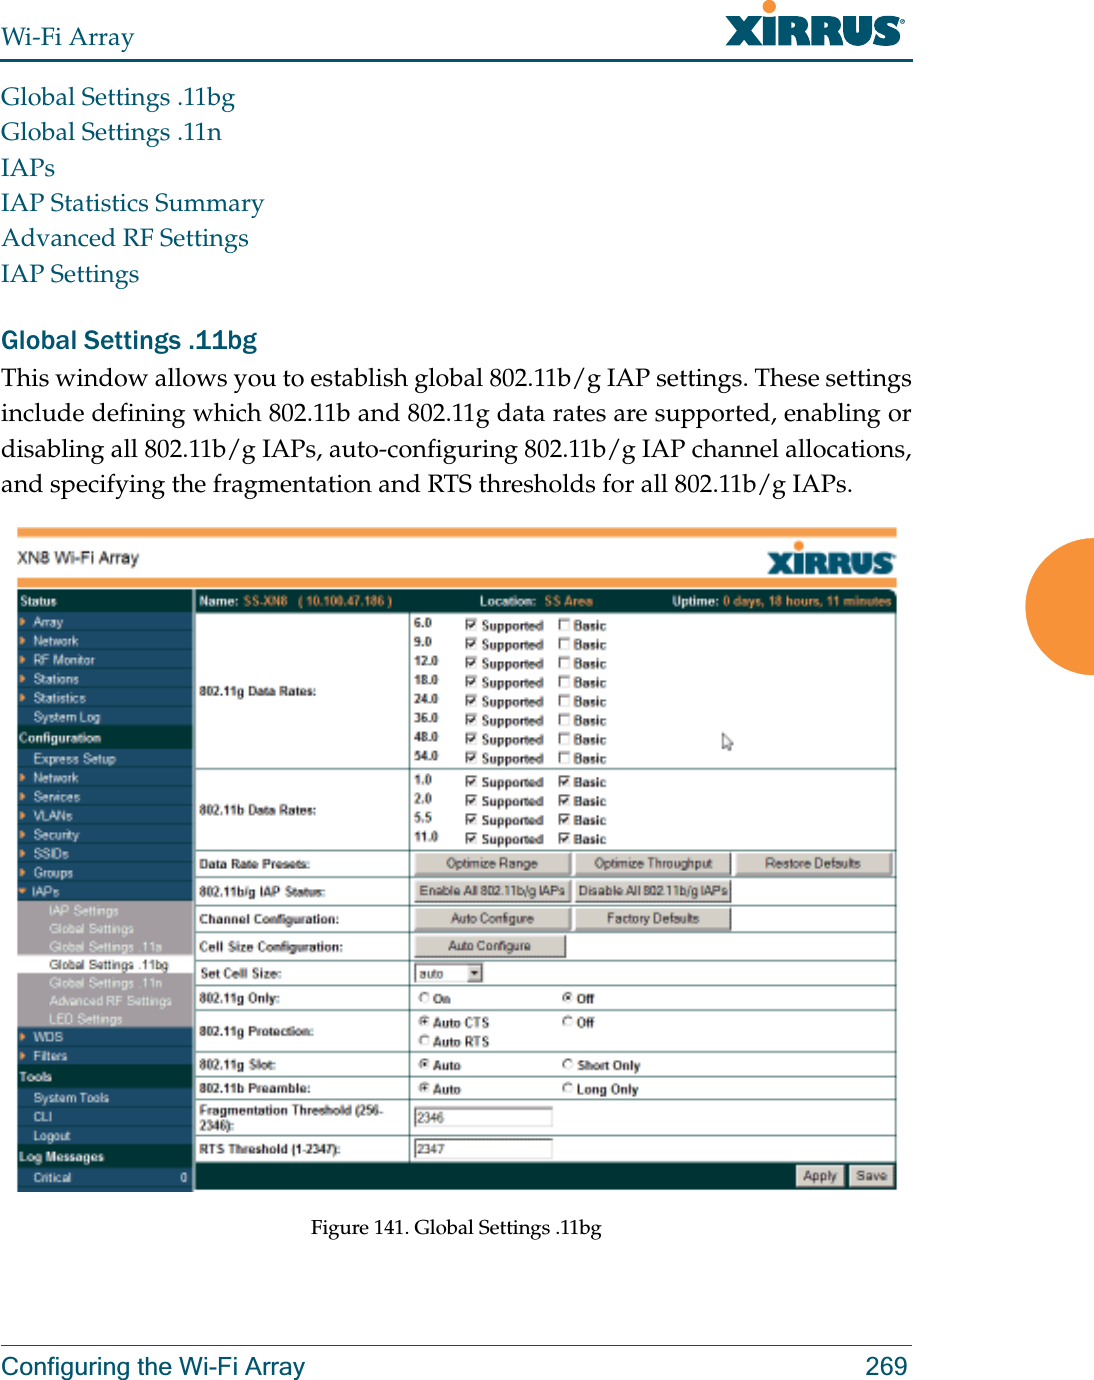 Wi-Fi ArrayConfiguring the Wi-Fi Array 269Global Settings .11bgGlobal Settings .11nIAPsIAP Statistics SummaryAdvanced RF SettingsIAP SettingsGlobal Settings .11bgThis window allows you to establish global 802.11b/g IAP settings. These settings include defining which 802.11b and 802.11g data rates are supported, enabling or disabling all 802.11b/g IAPs, auto-configuring 802.11b/g IAP channel allocations,and specifying the fragmentation and RTS thresholds for all 802.11b/g IAPs.Figure 141. Global Settings .11bg